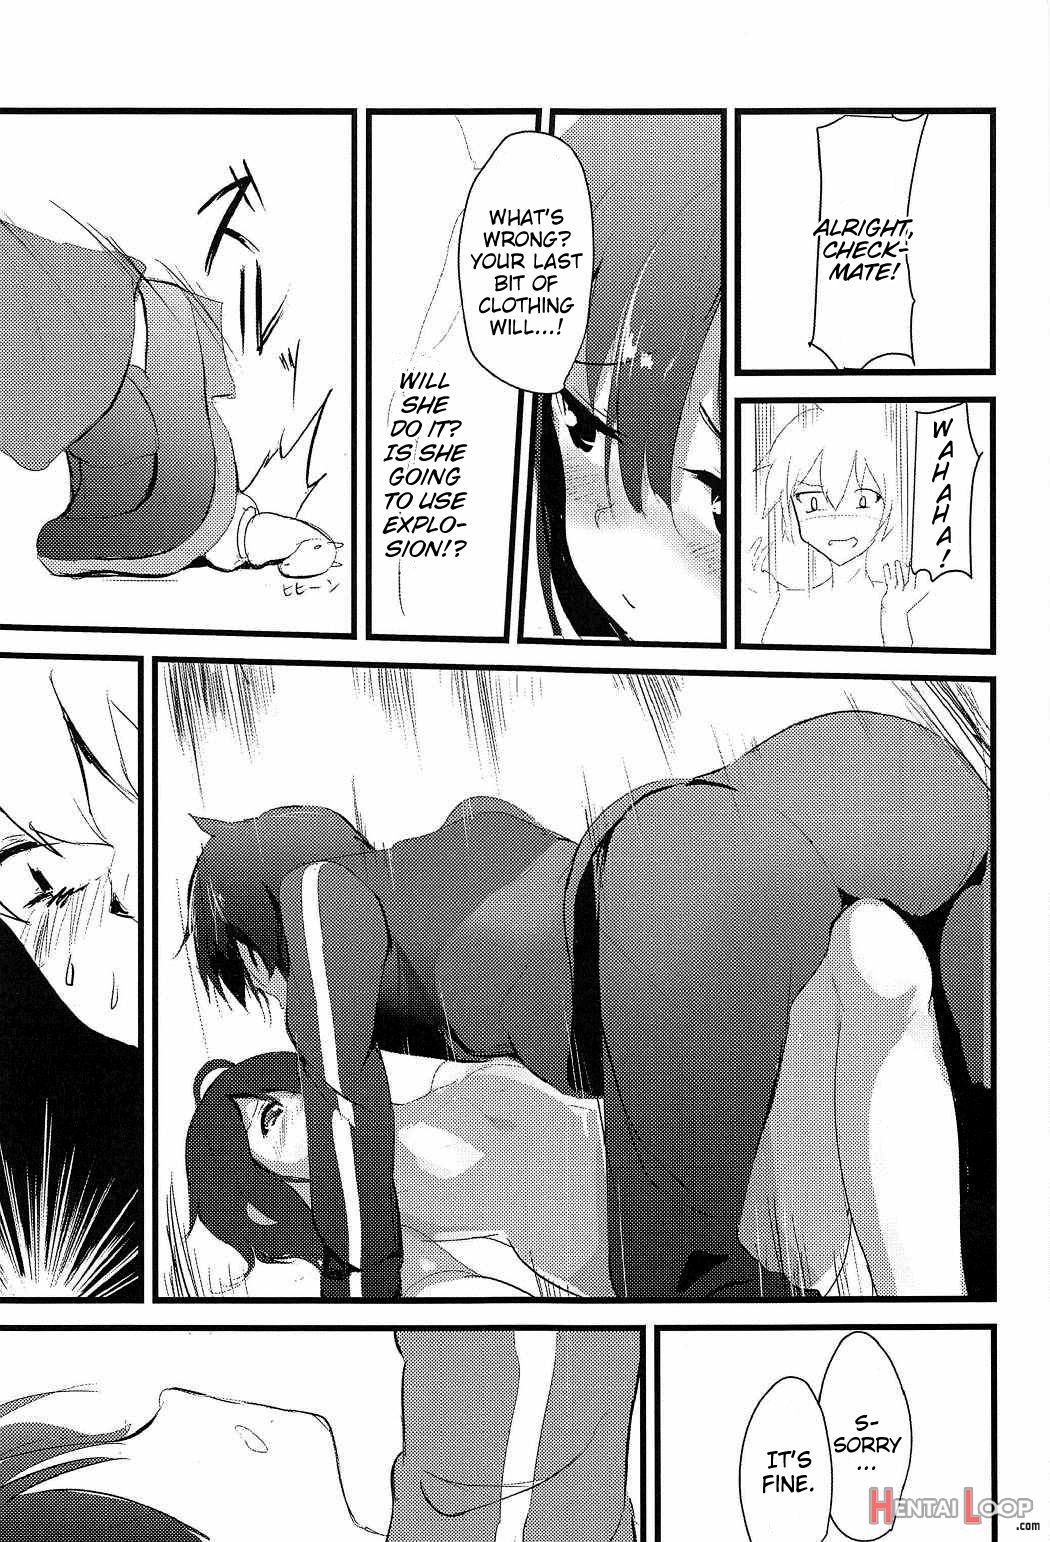 Megumin page 6